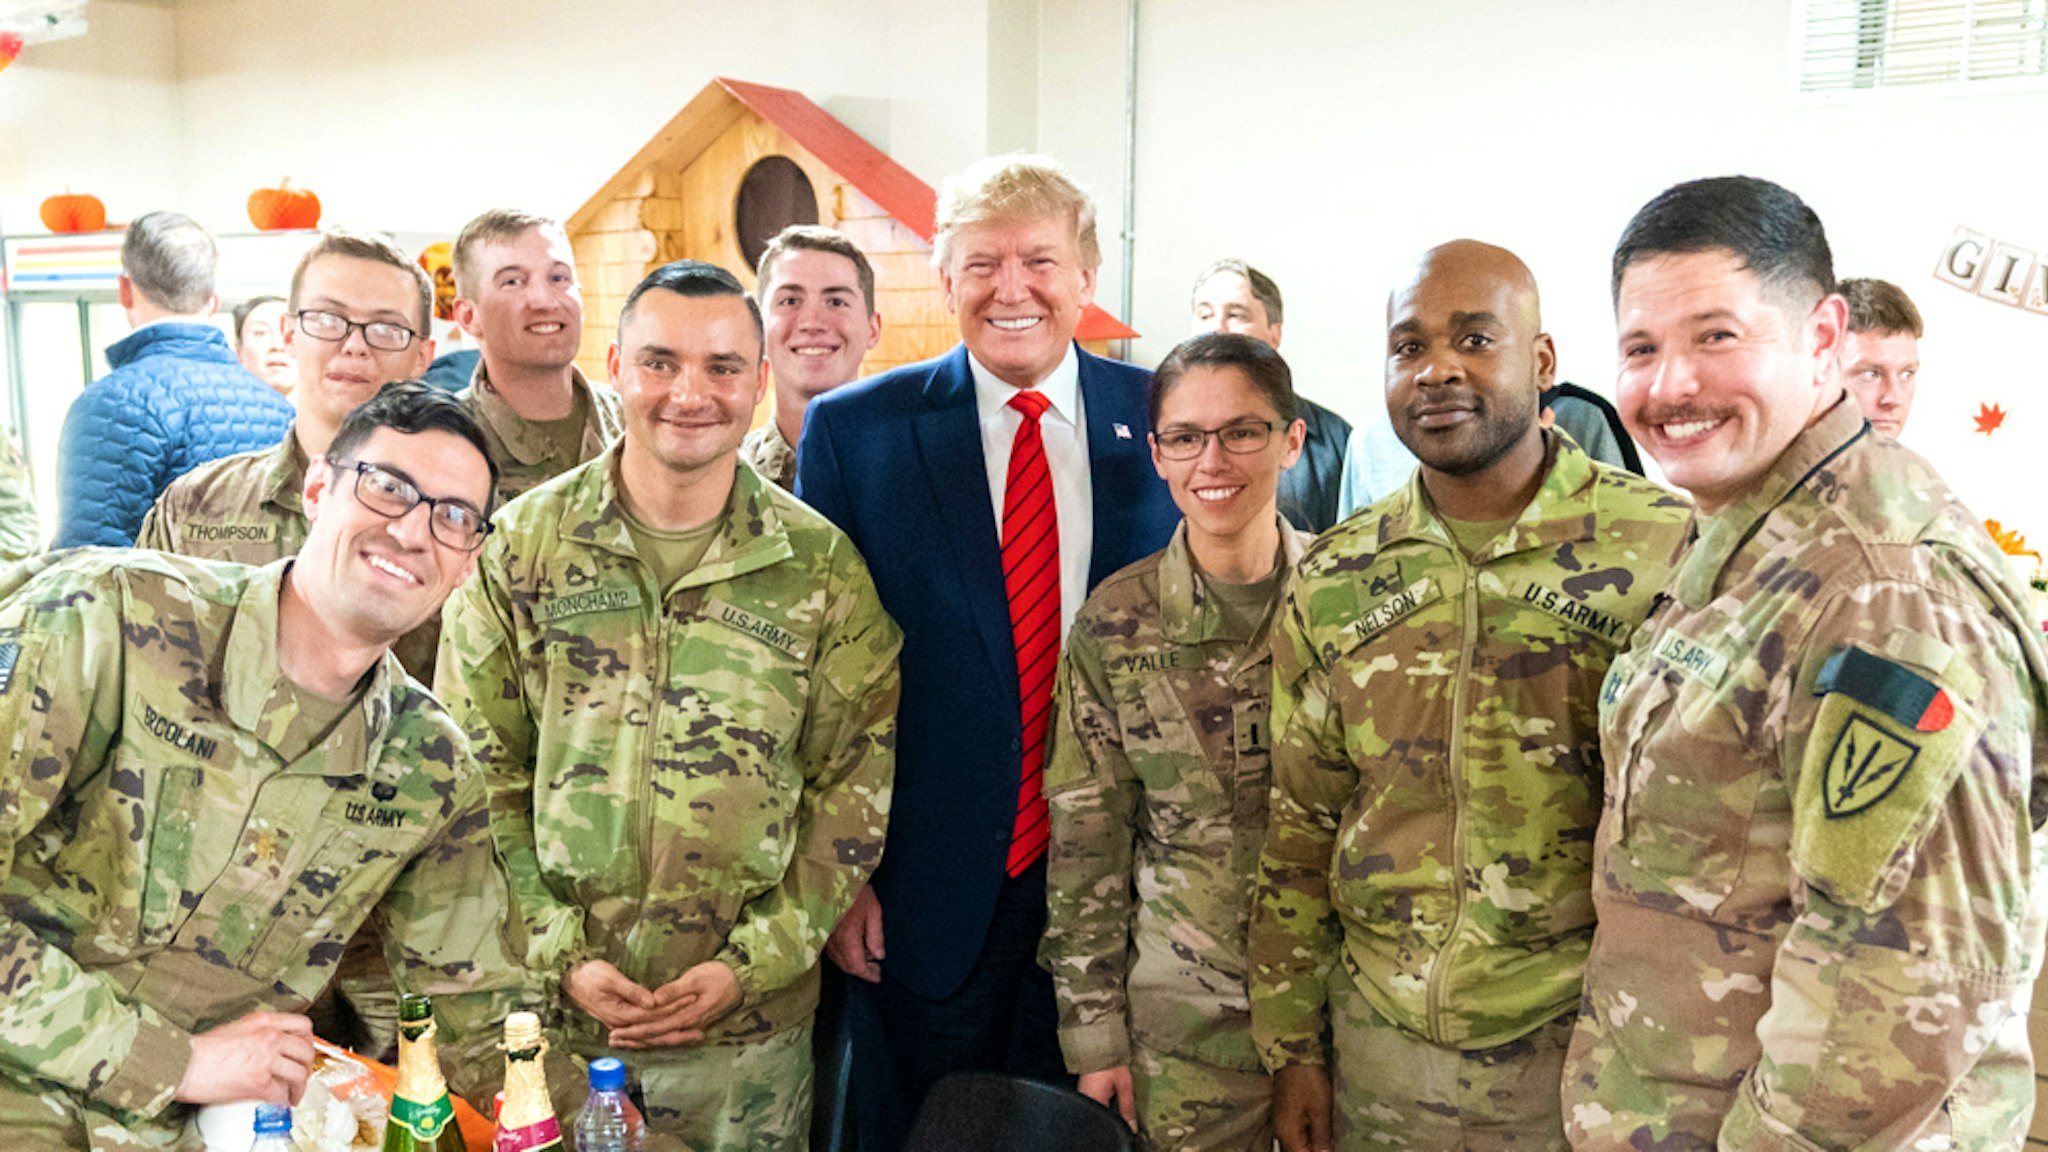 President Donald J. Trump visits troops at Bagram Airfield on Thursday, November 28, 2019, in Afghanistan, during a surprise visit to spend Thanksgiving with troops.